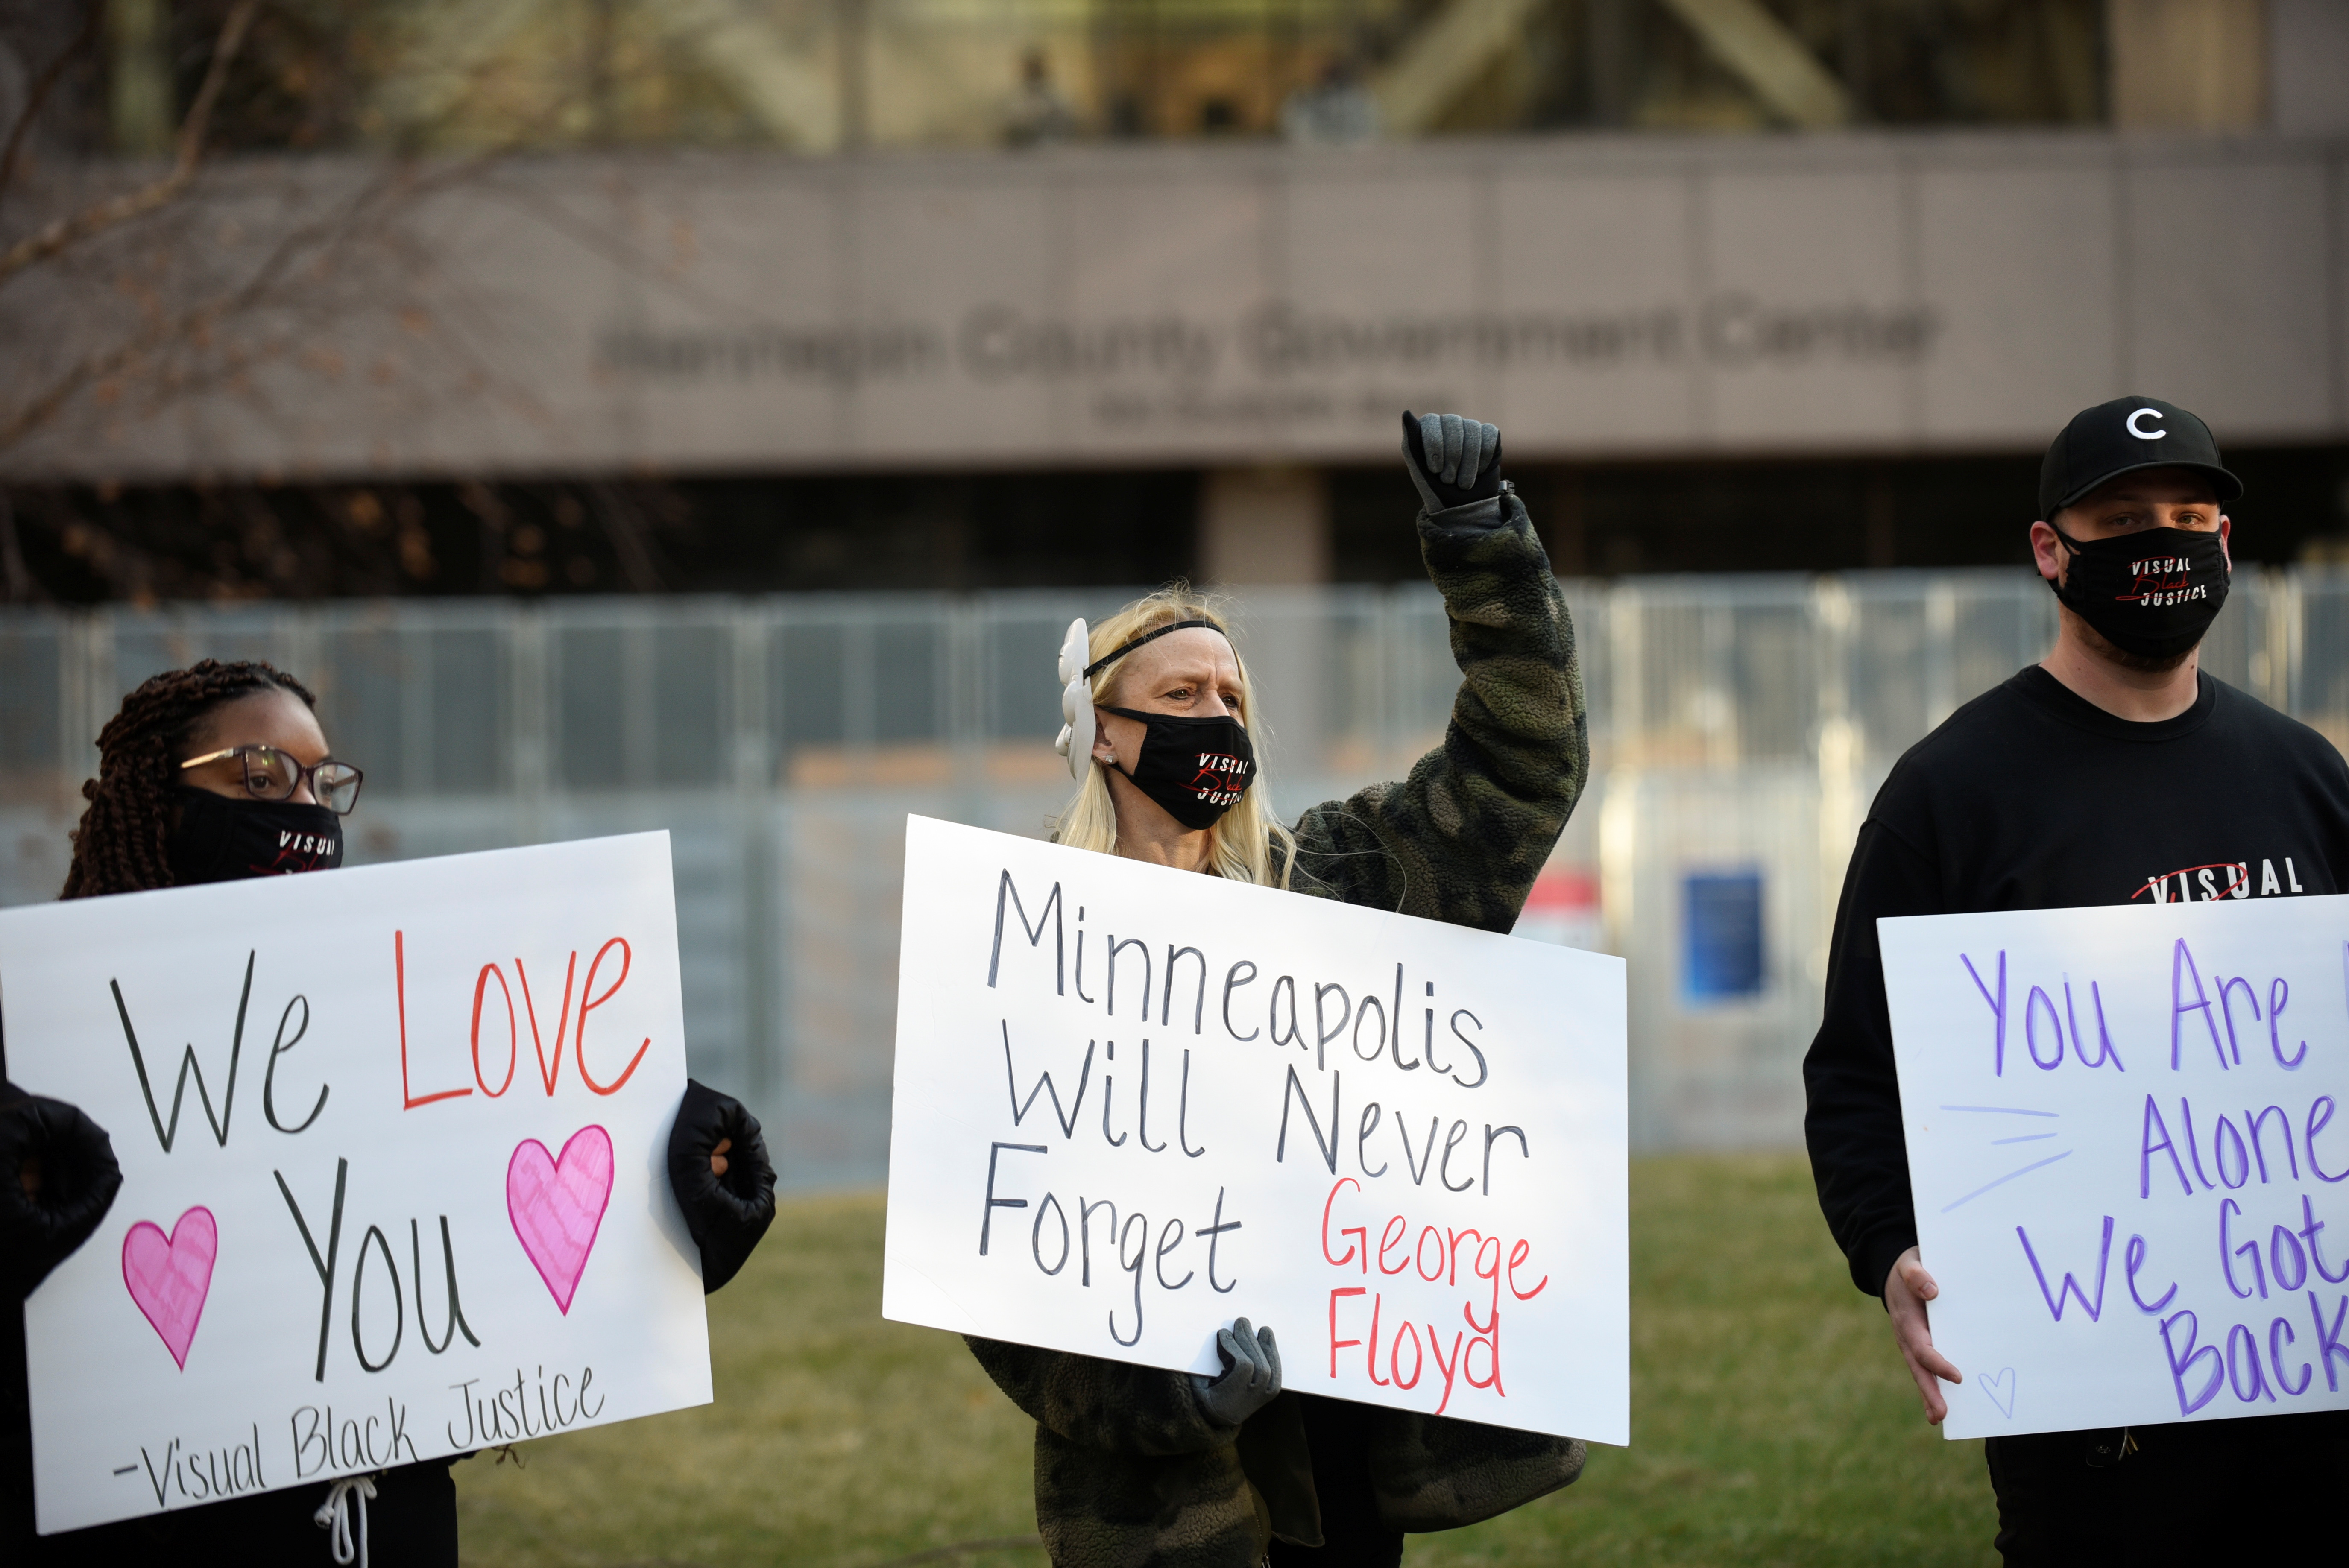 People demonstrate outside the Hennepin County Government Center during the first day of the trial of former police Derek Chauvin, who is facing murder charges in the death of George Floyd, in Minneapolis, Minnesota, U.S., March 29, 2021. REUTERS/Nicholas Pfosi